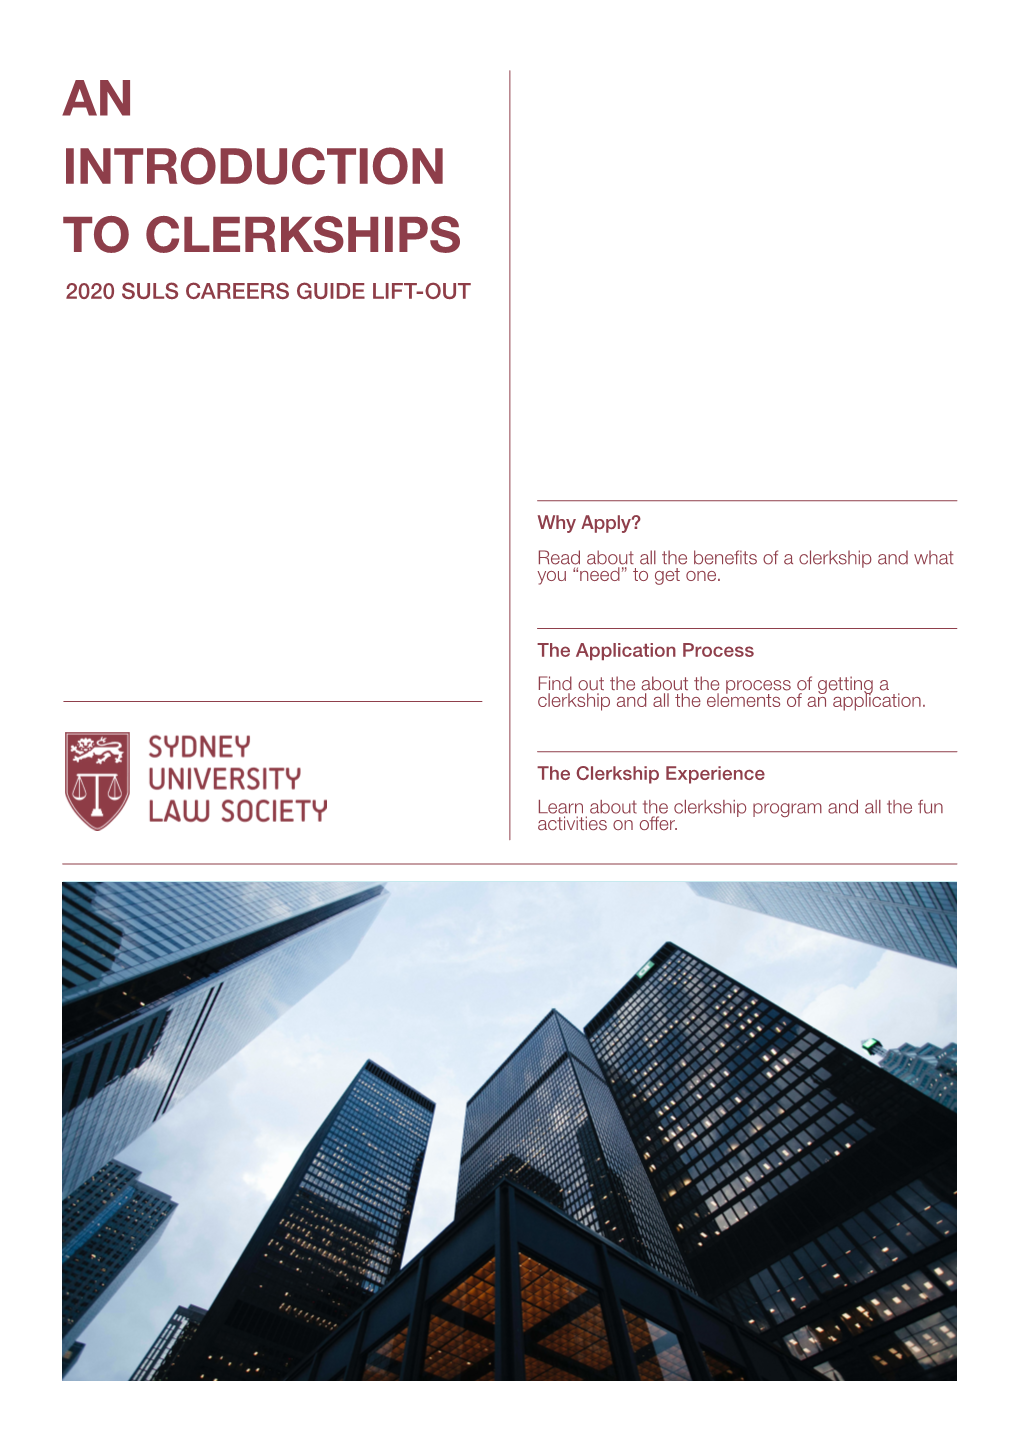 Introduction to Clerkships Guide Possible